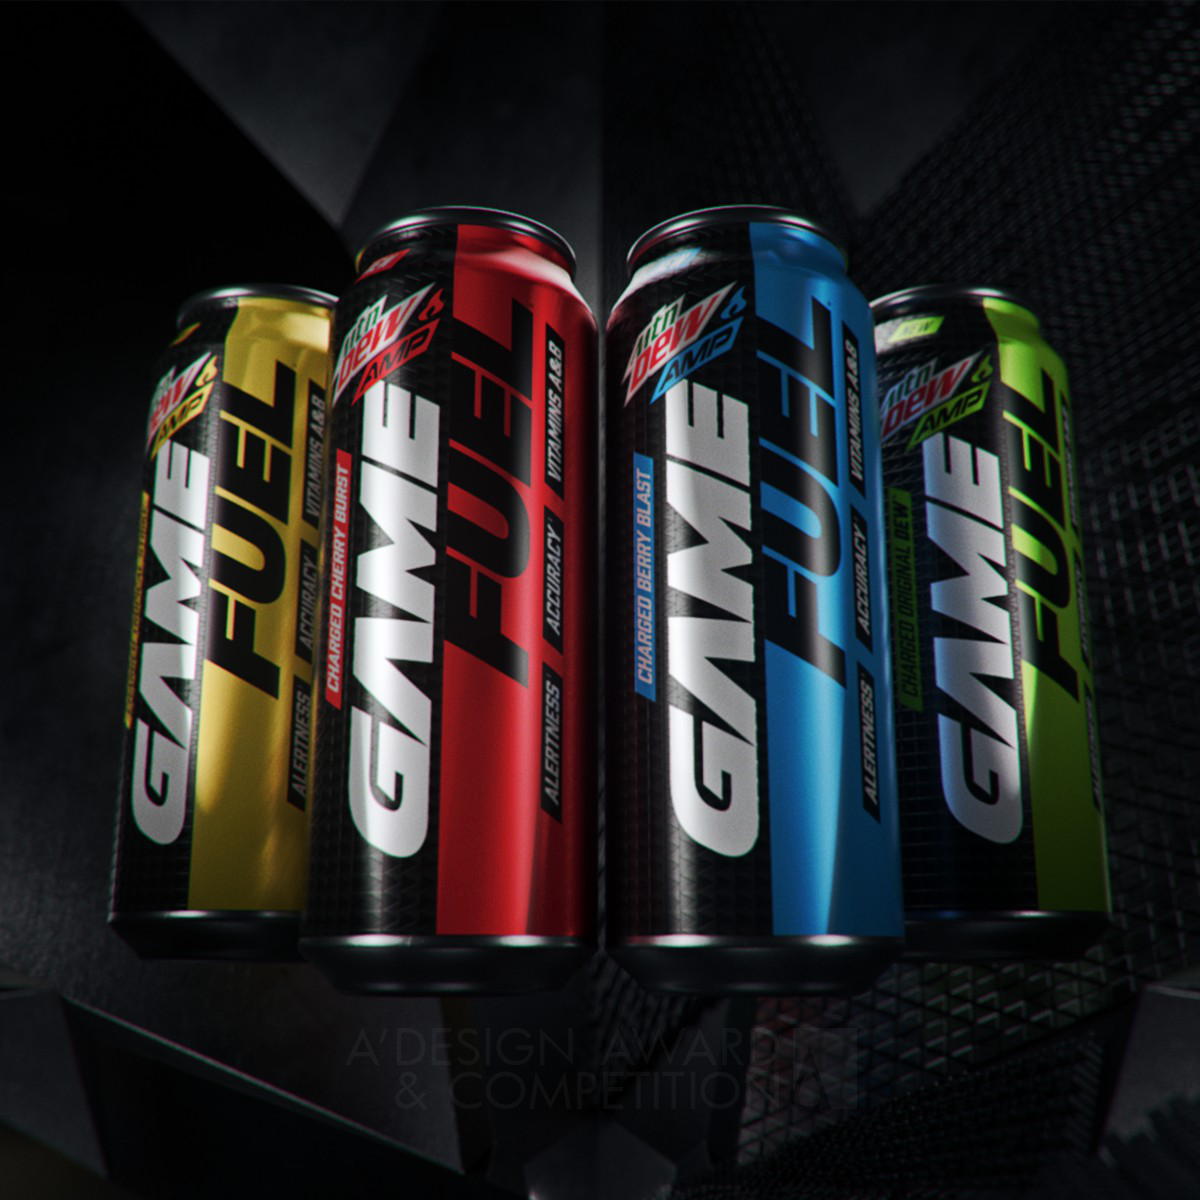 PepsiCo Design and Innovation wins Silver at the prestigious A' Packaging Design Award with Mtn Dew AMP Game Fuel Launch Packaging.